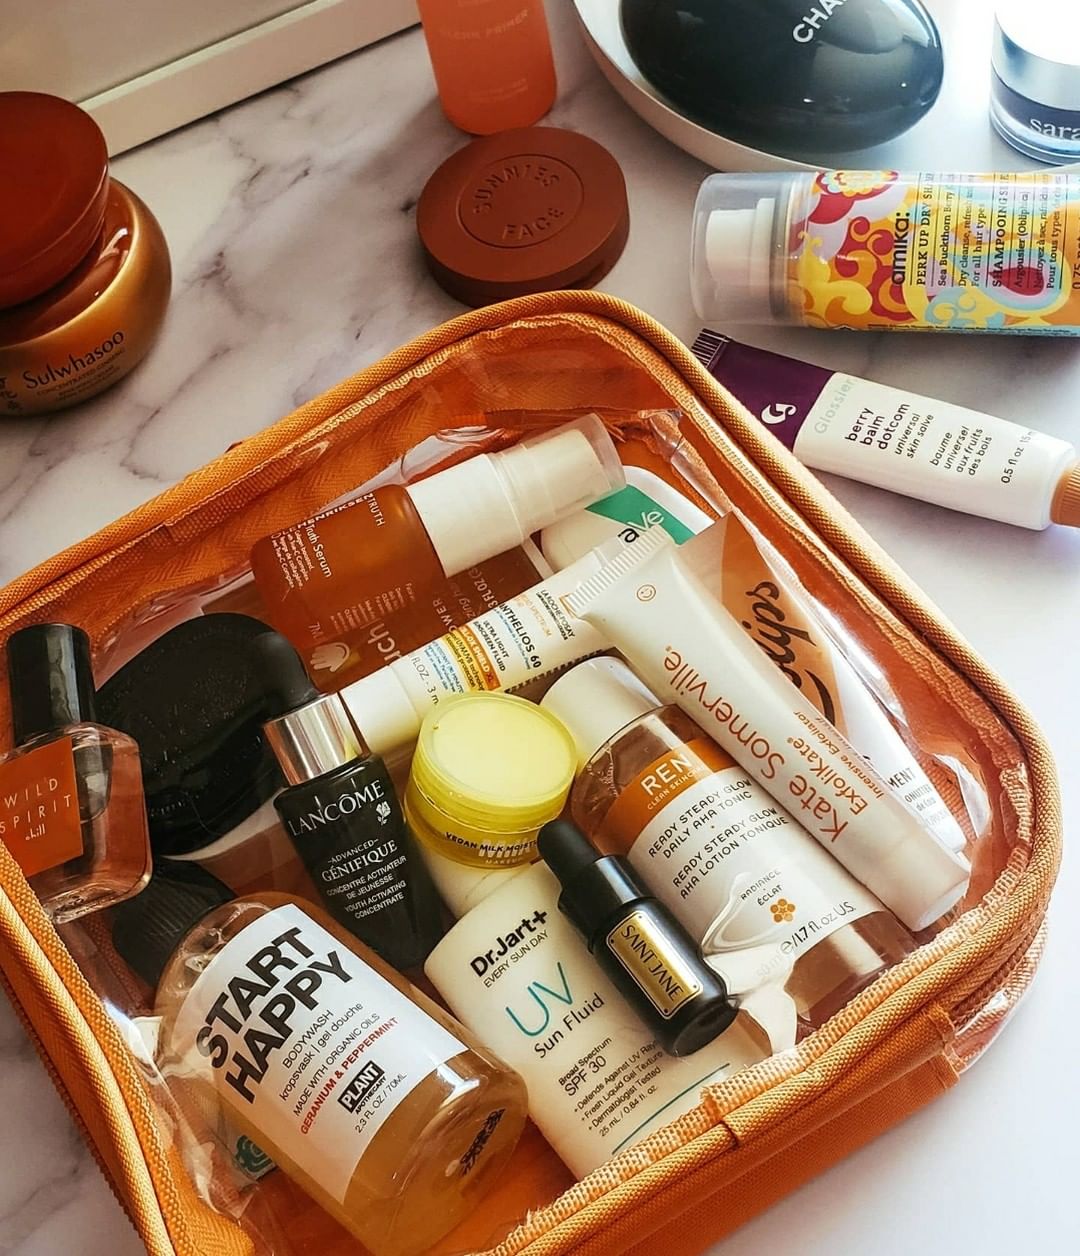 What to pack in that quart-sized bag - Andrea Sharb